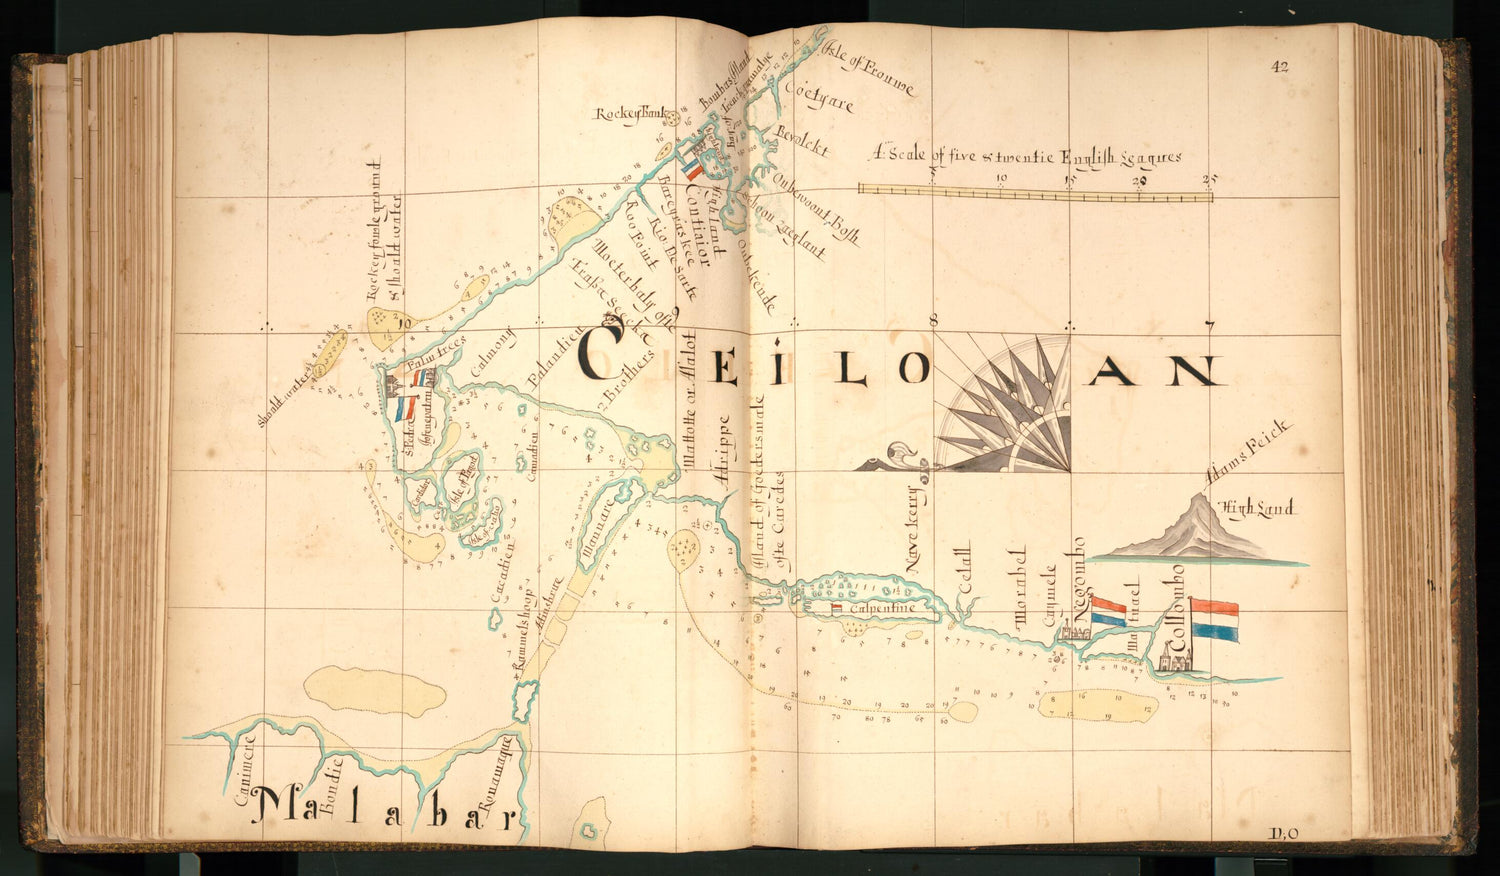 This old map of 42) Ceiloan from Buccaneer Atlas from 1690 was created by William Hacke in 1690